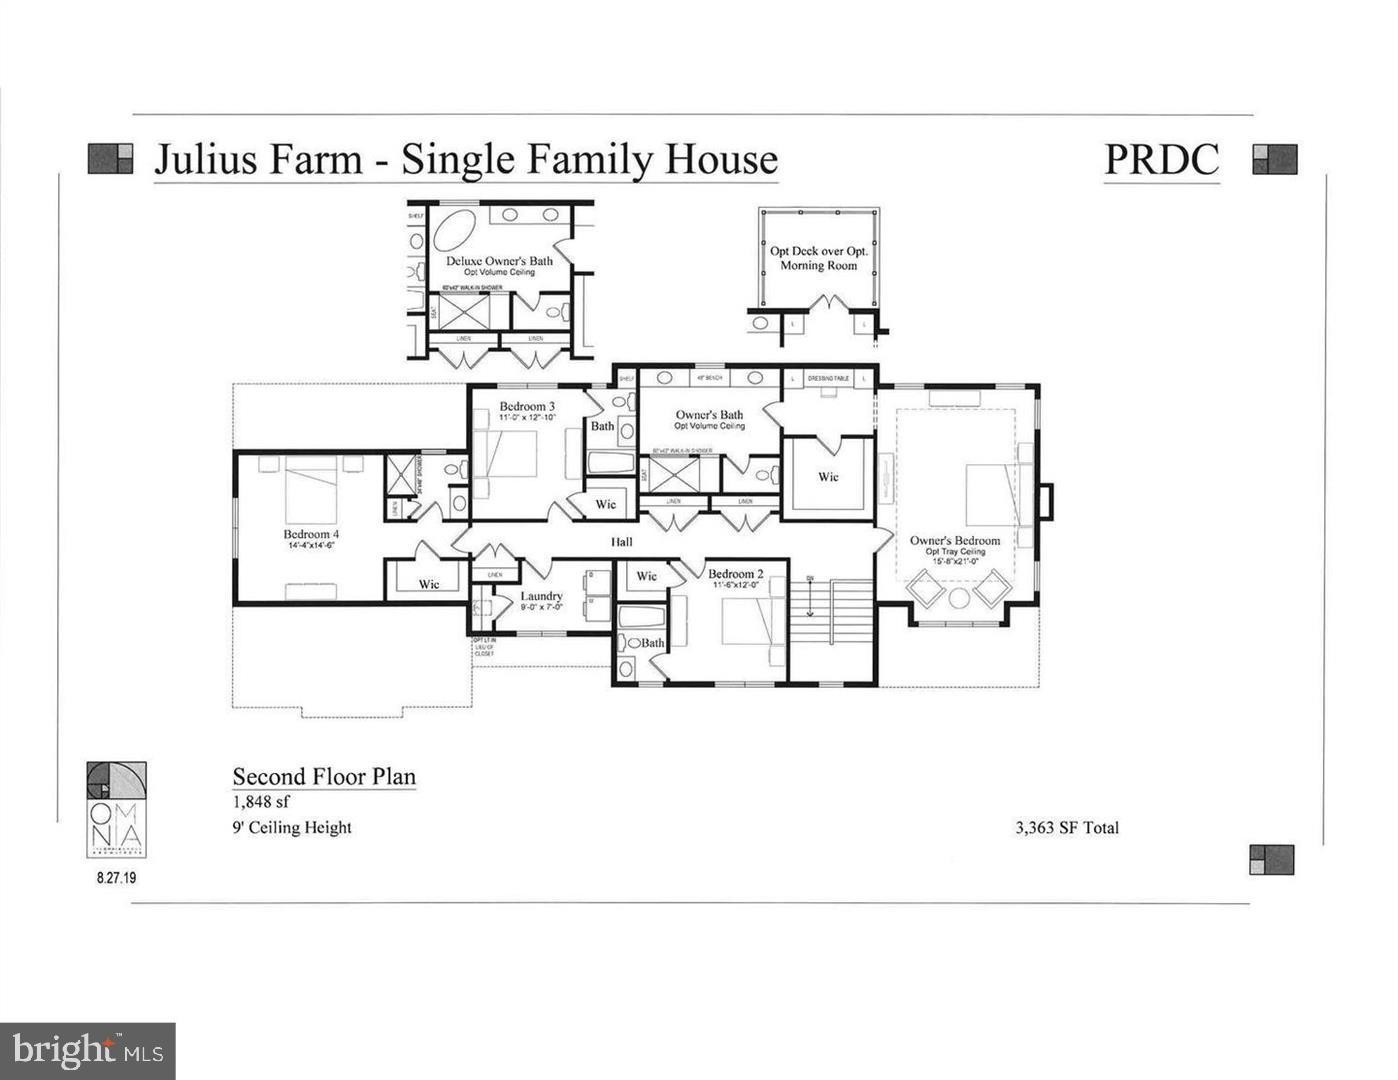 dorothy house plan drawing